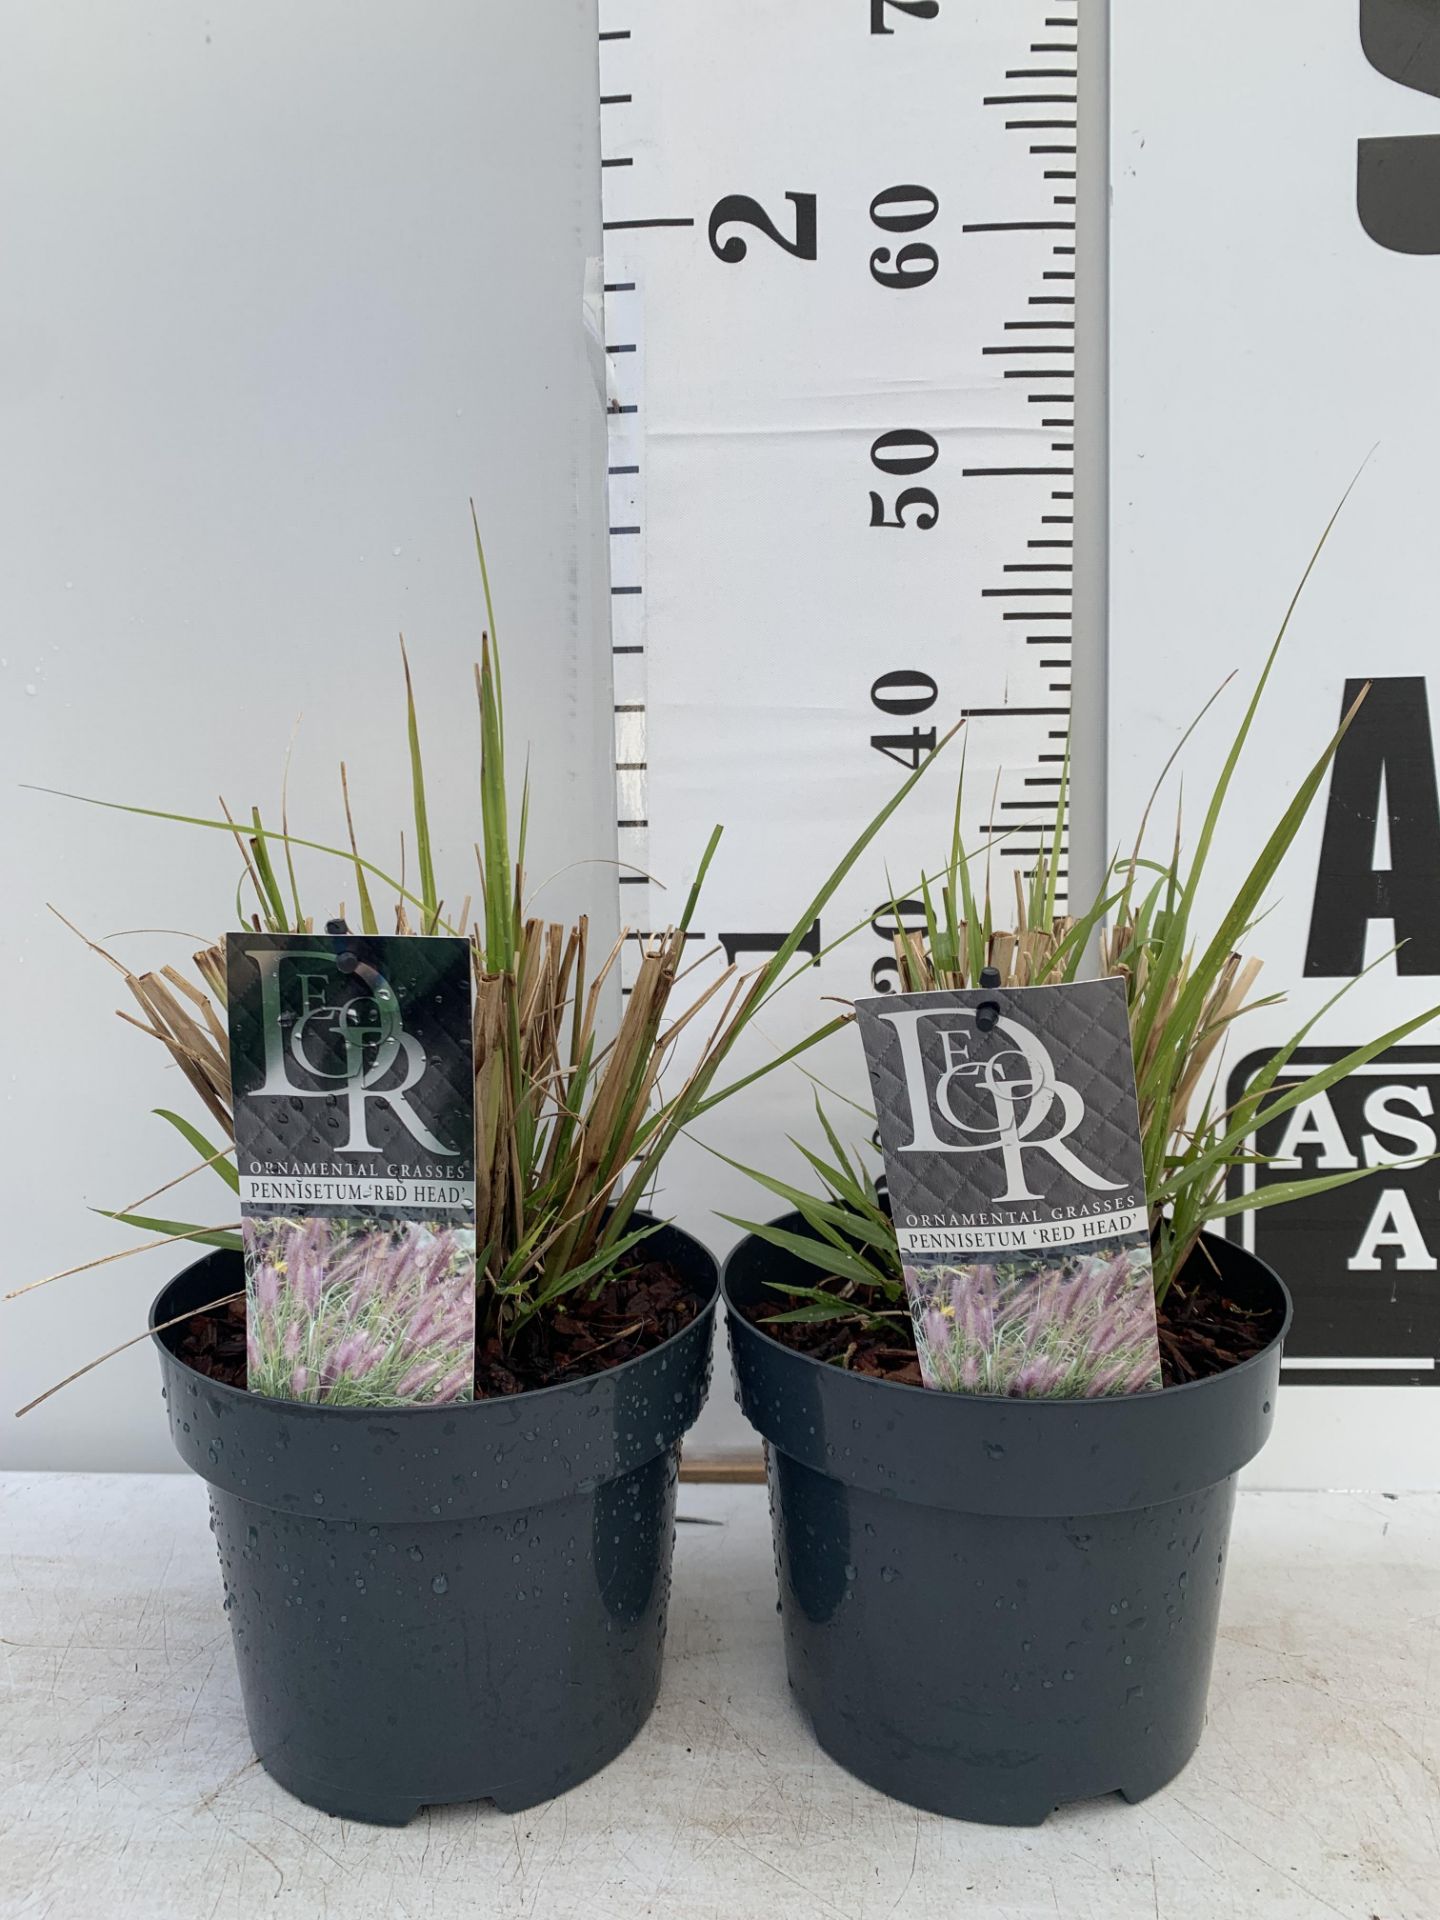 TWO ORNAMENTAL GRASSES PENNISETUM 'REDHEAD' IN 4 LTR POTS APPROX 60CM IN HEIGHT PLUS VAT TO BE